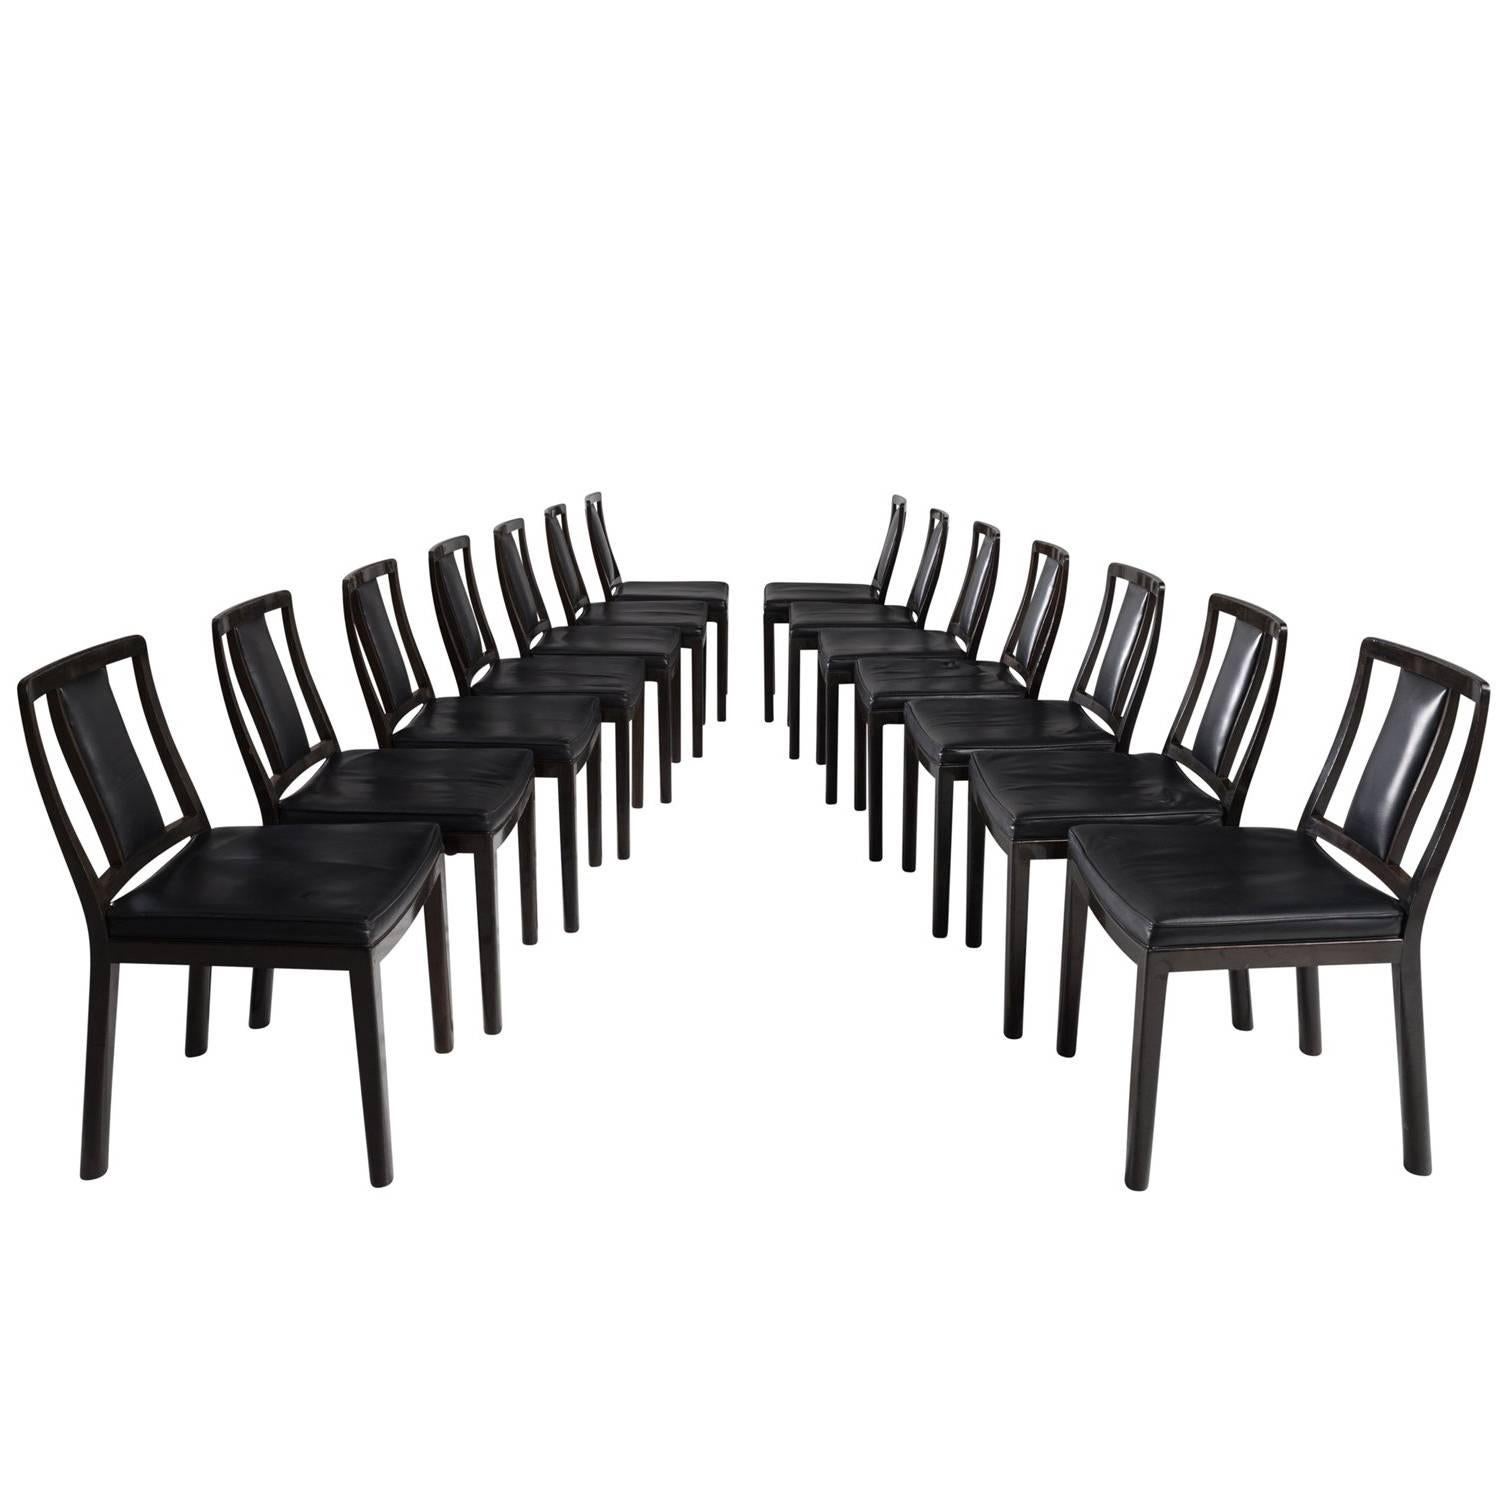 Edward Wormley Set of 14 Dining Room Chairs for Dunbar